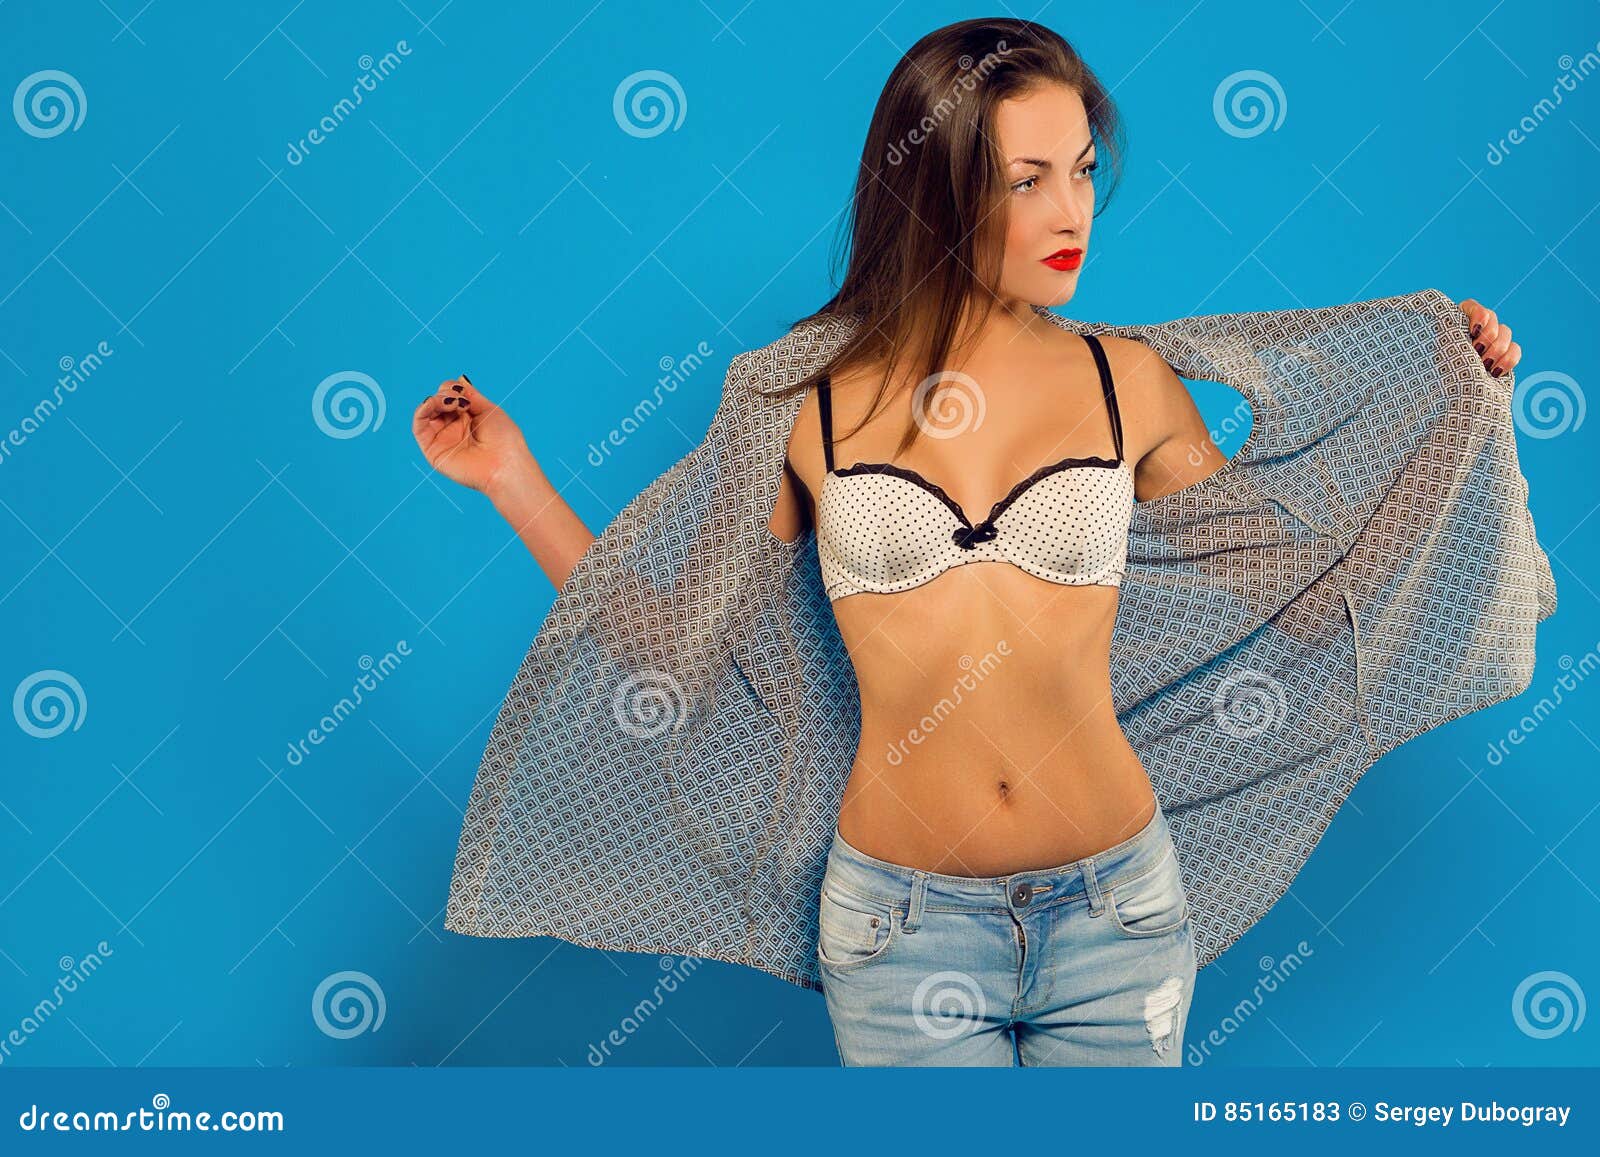 https://thumbs.dreamstime.com/z/sexy-girl-takes-off-his-shirt-showing-bra-blue-background-85165183.jpg